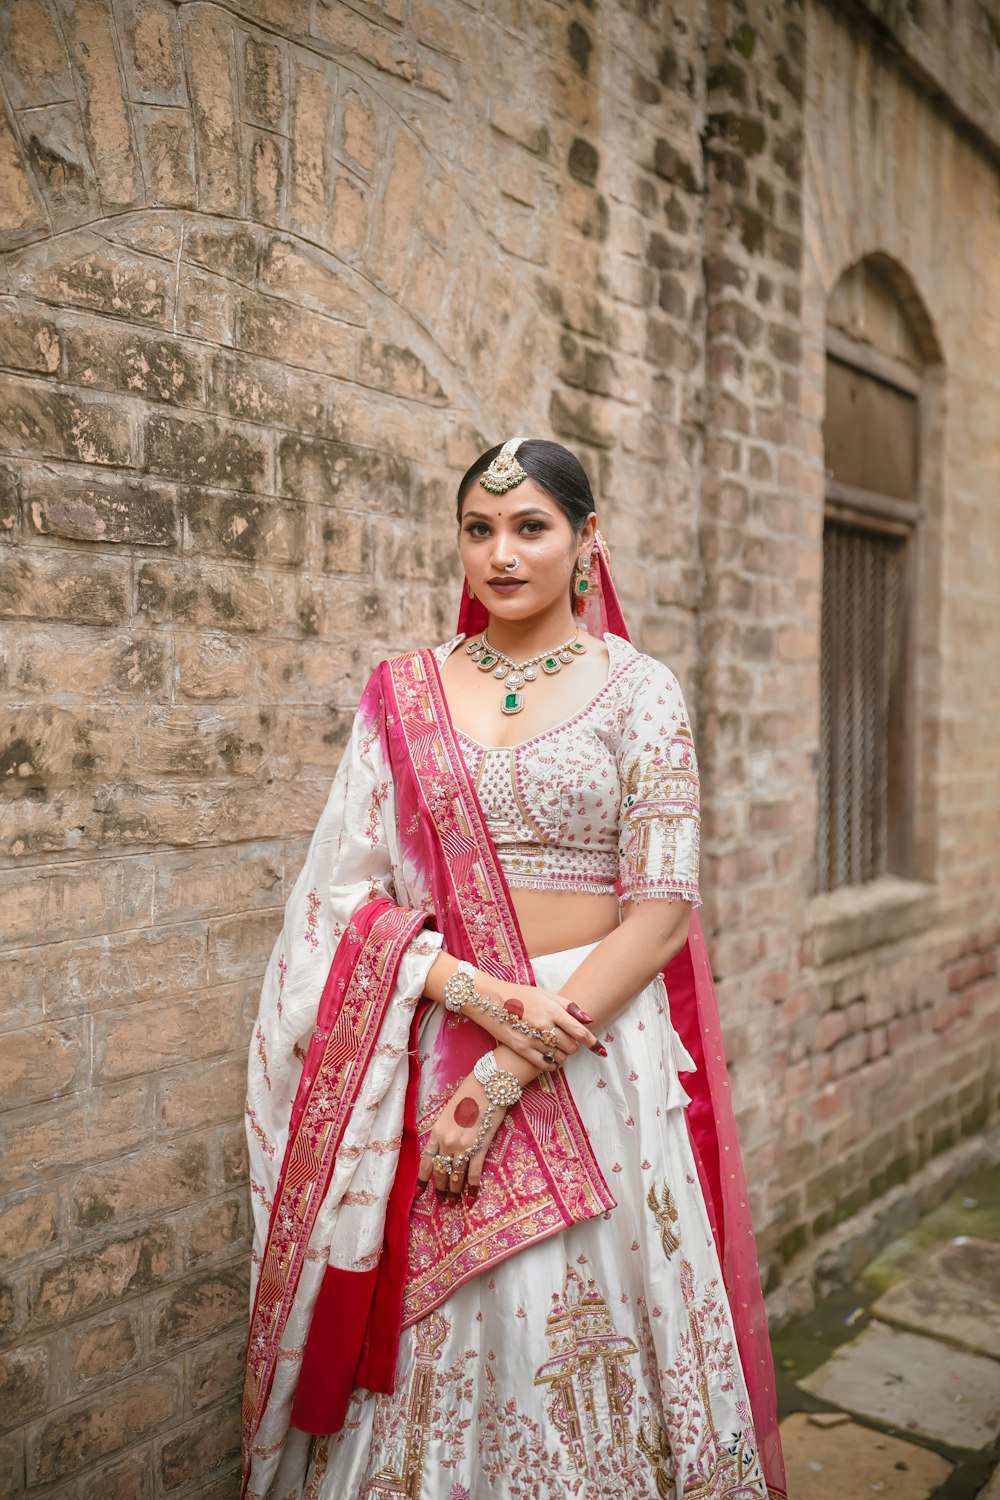 a woman in a white and red lehenga standing in front of a brick